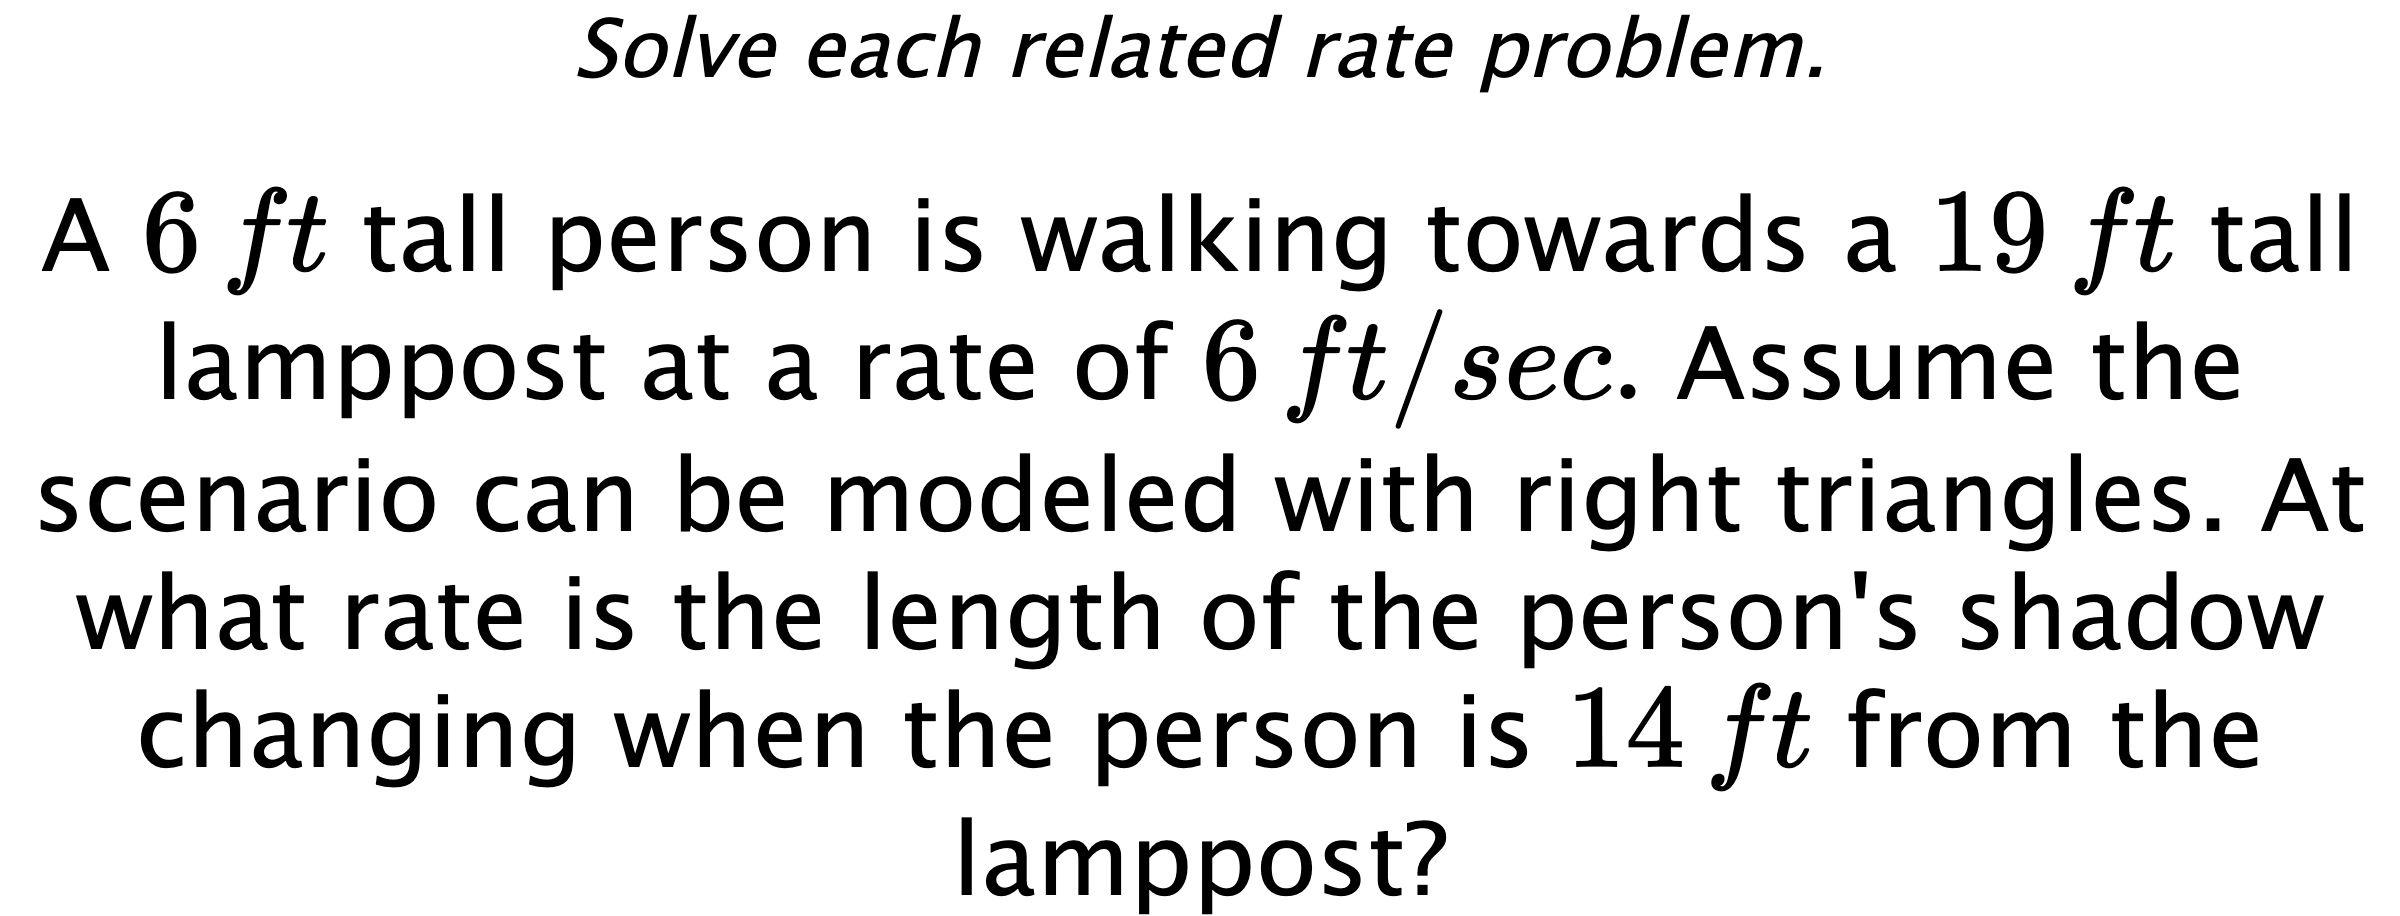 Solve each related rate problem. A $6\,ft$ tall person is walking towards a $19\,ft$ tall lamppost at a rate of $6\,ft/sec.$ Assume the scenario can be modeled with right triangles. At what rate is the length of the person's shadow changing when the person is $14\,ft$ from the lamppost?